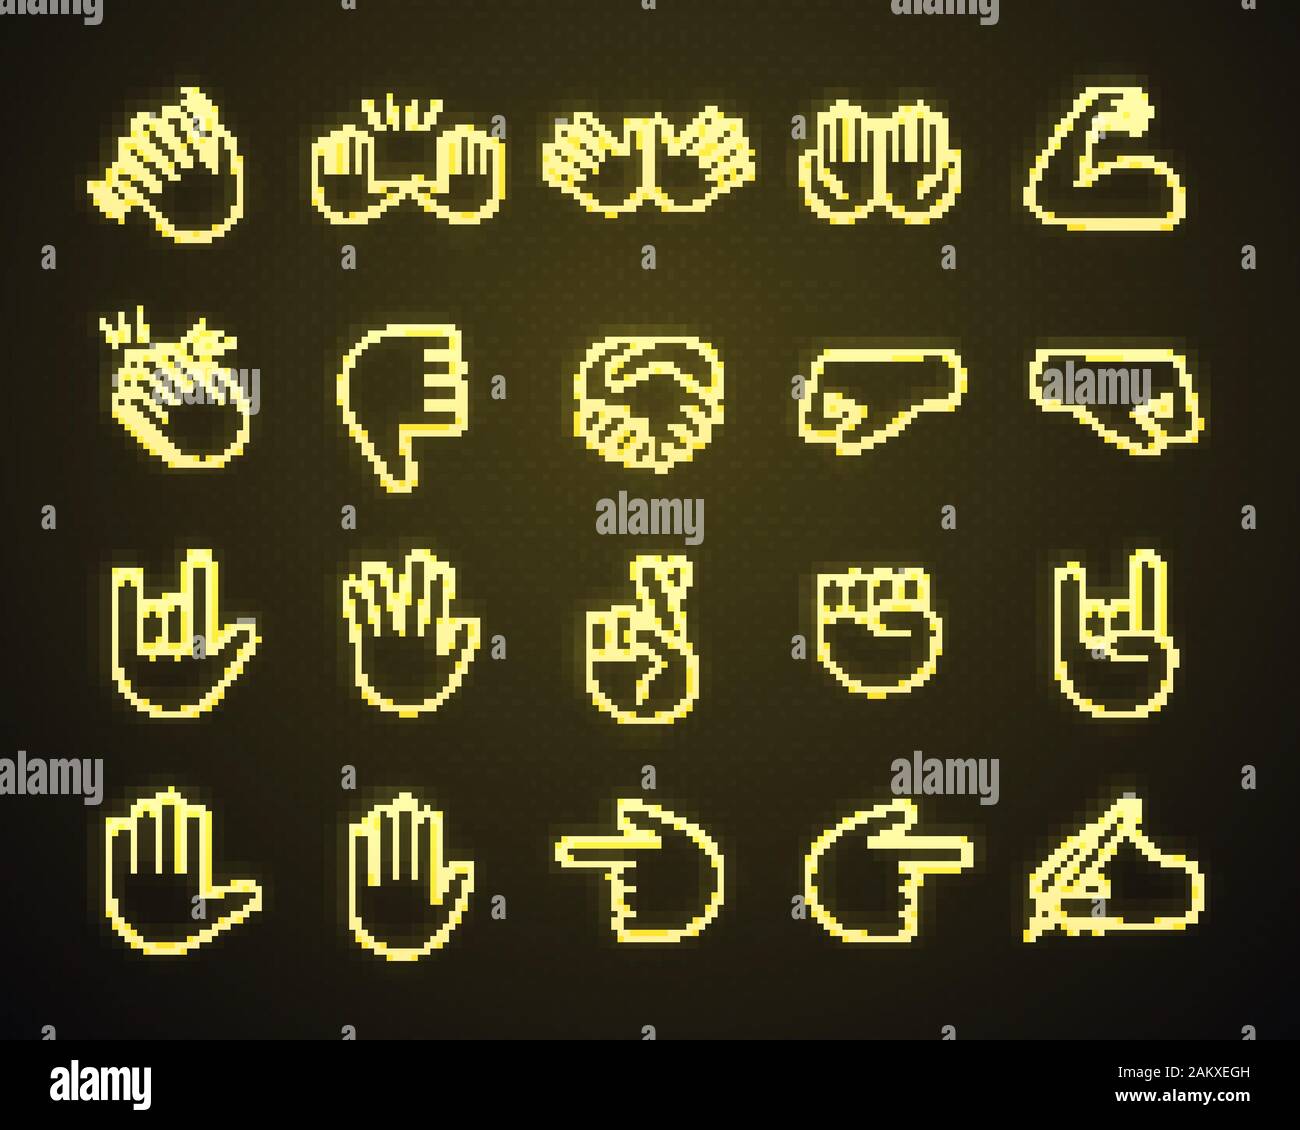 Hand gesture emojis neon light icons set. Pointing fingers, fists, palms. Social media, network emoticons. OK, hello, rock, like gesturing. Hand symbo Stock Vector